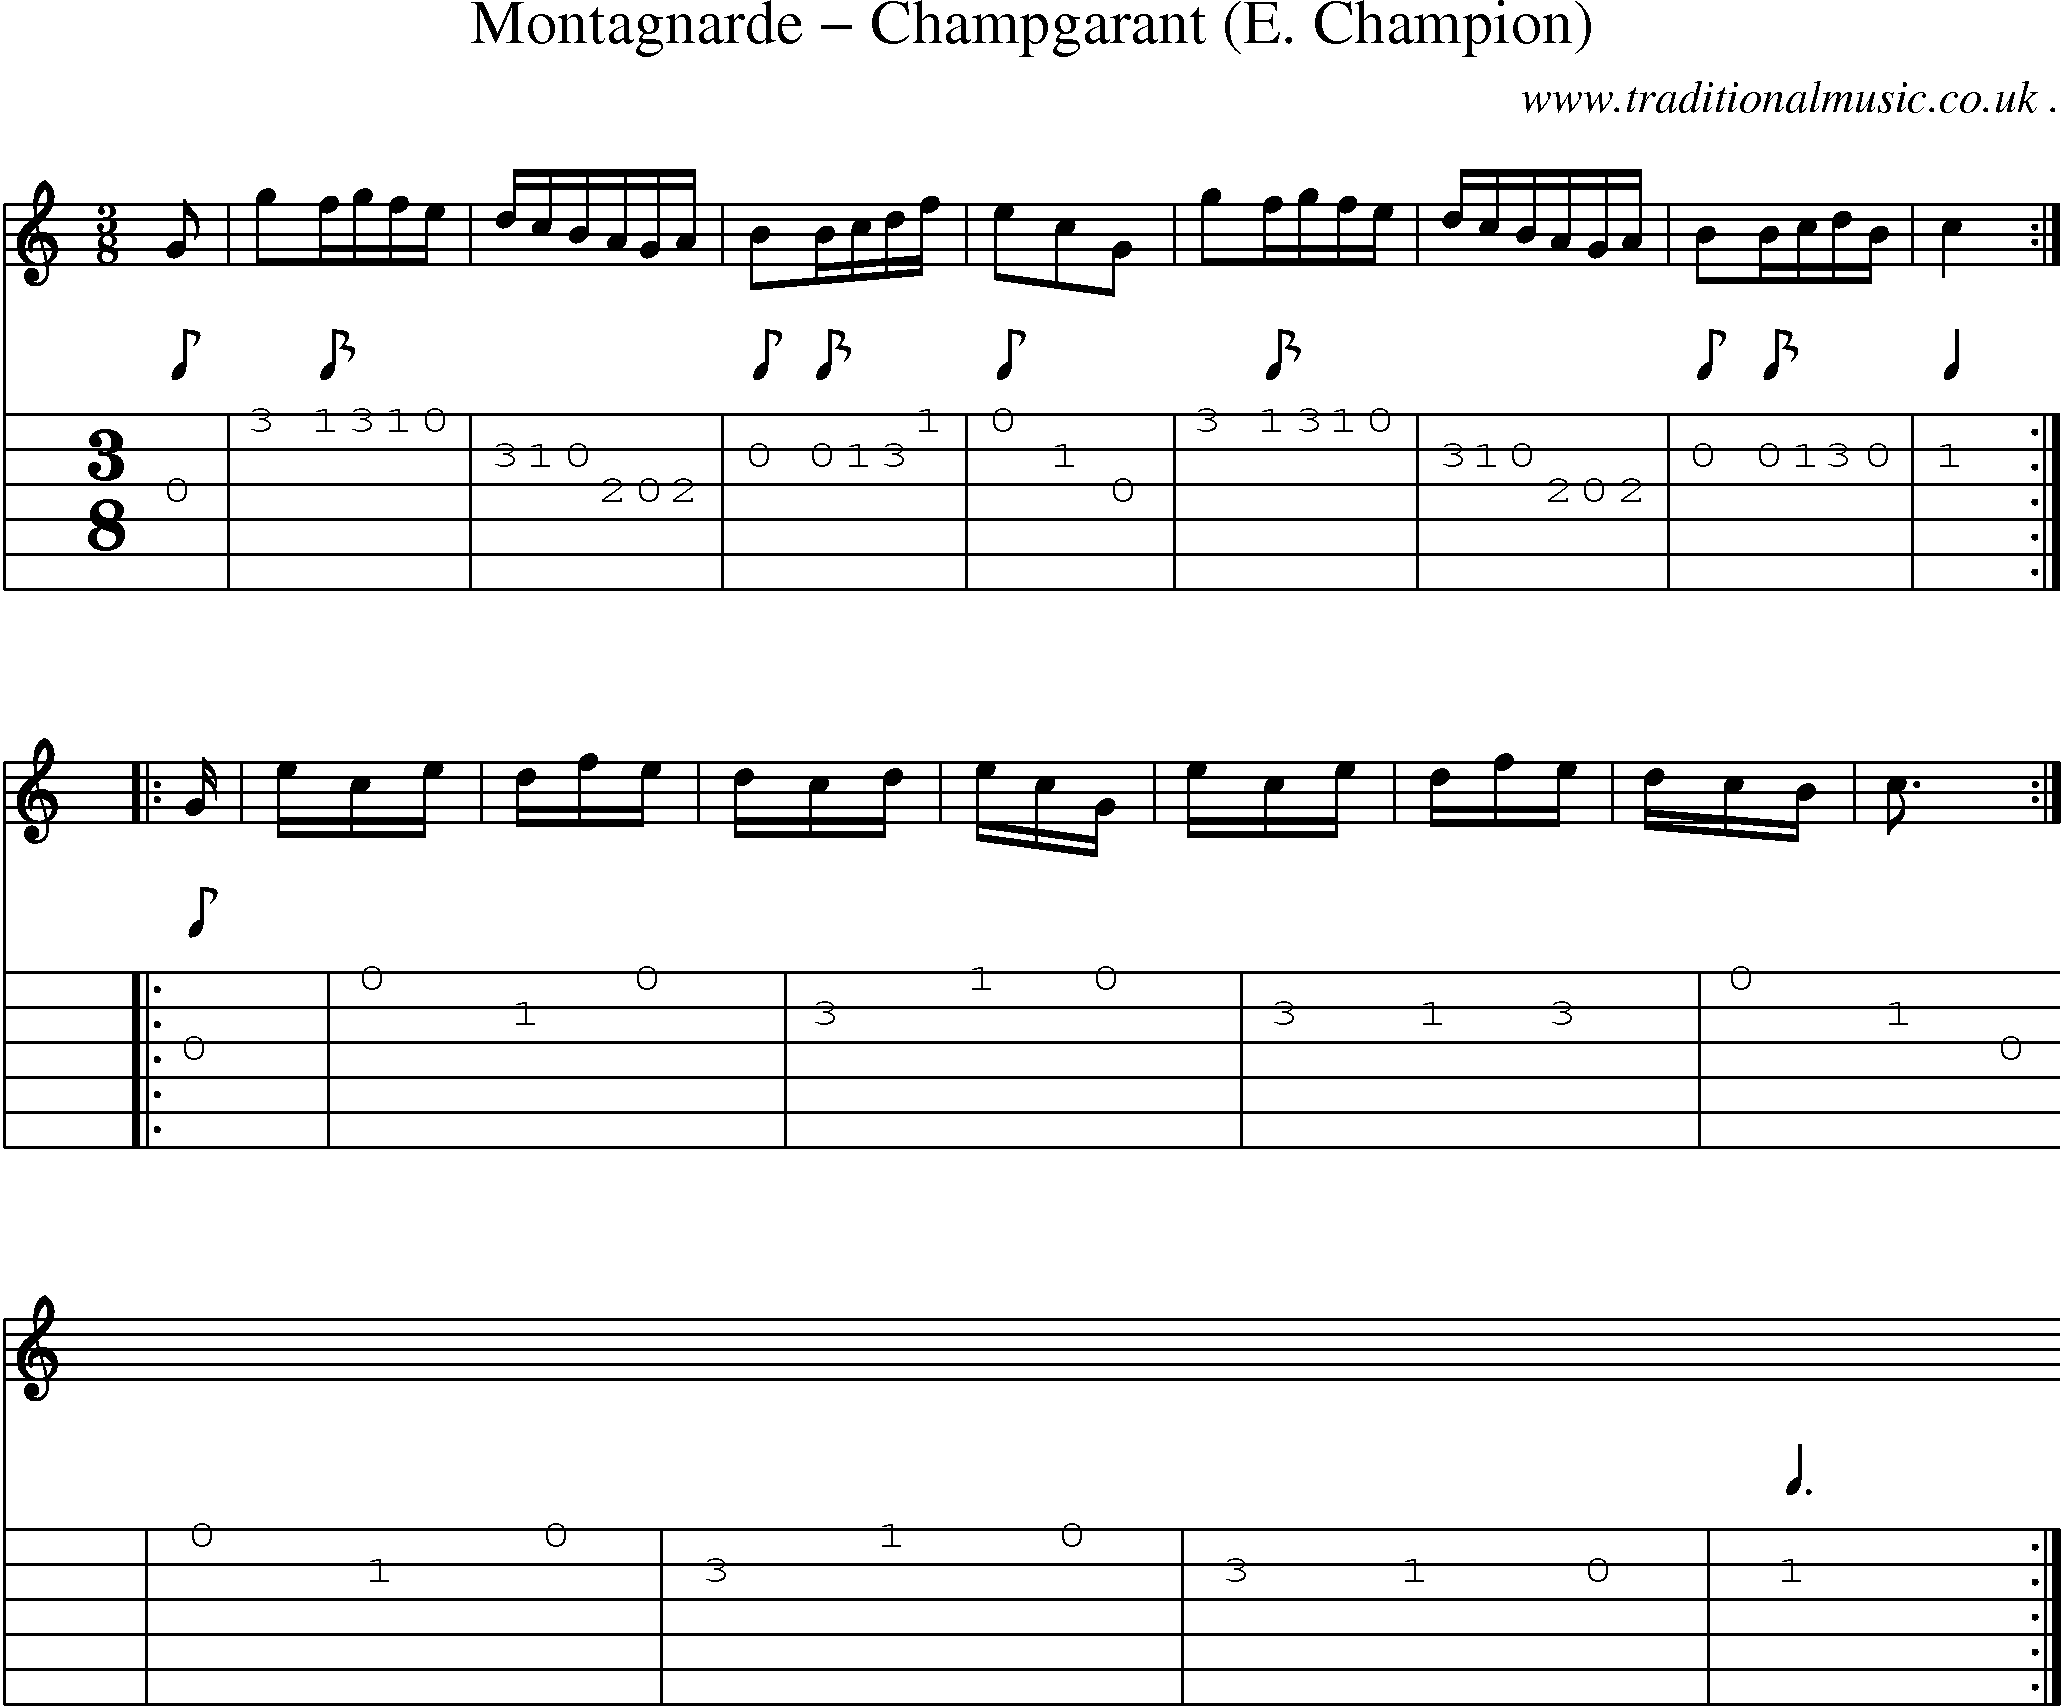 Sheet-Music and Guitar Tabs for Montagnarde Champgarant (e Champion)